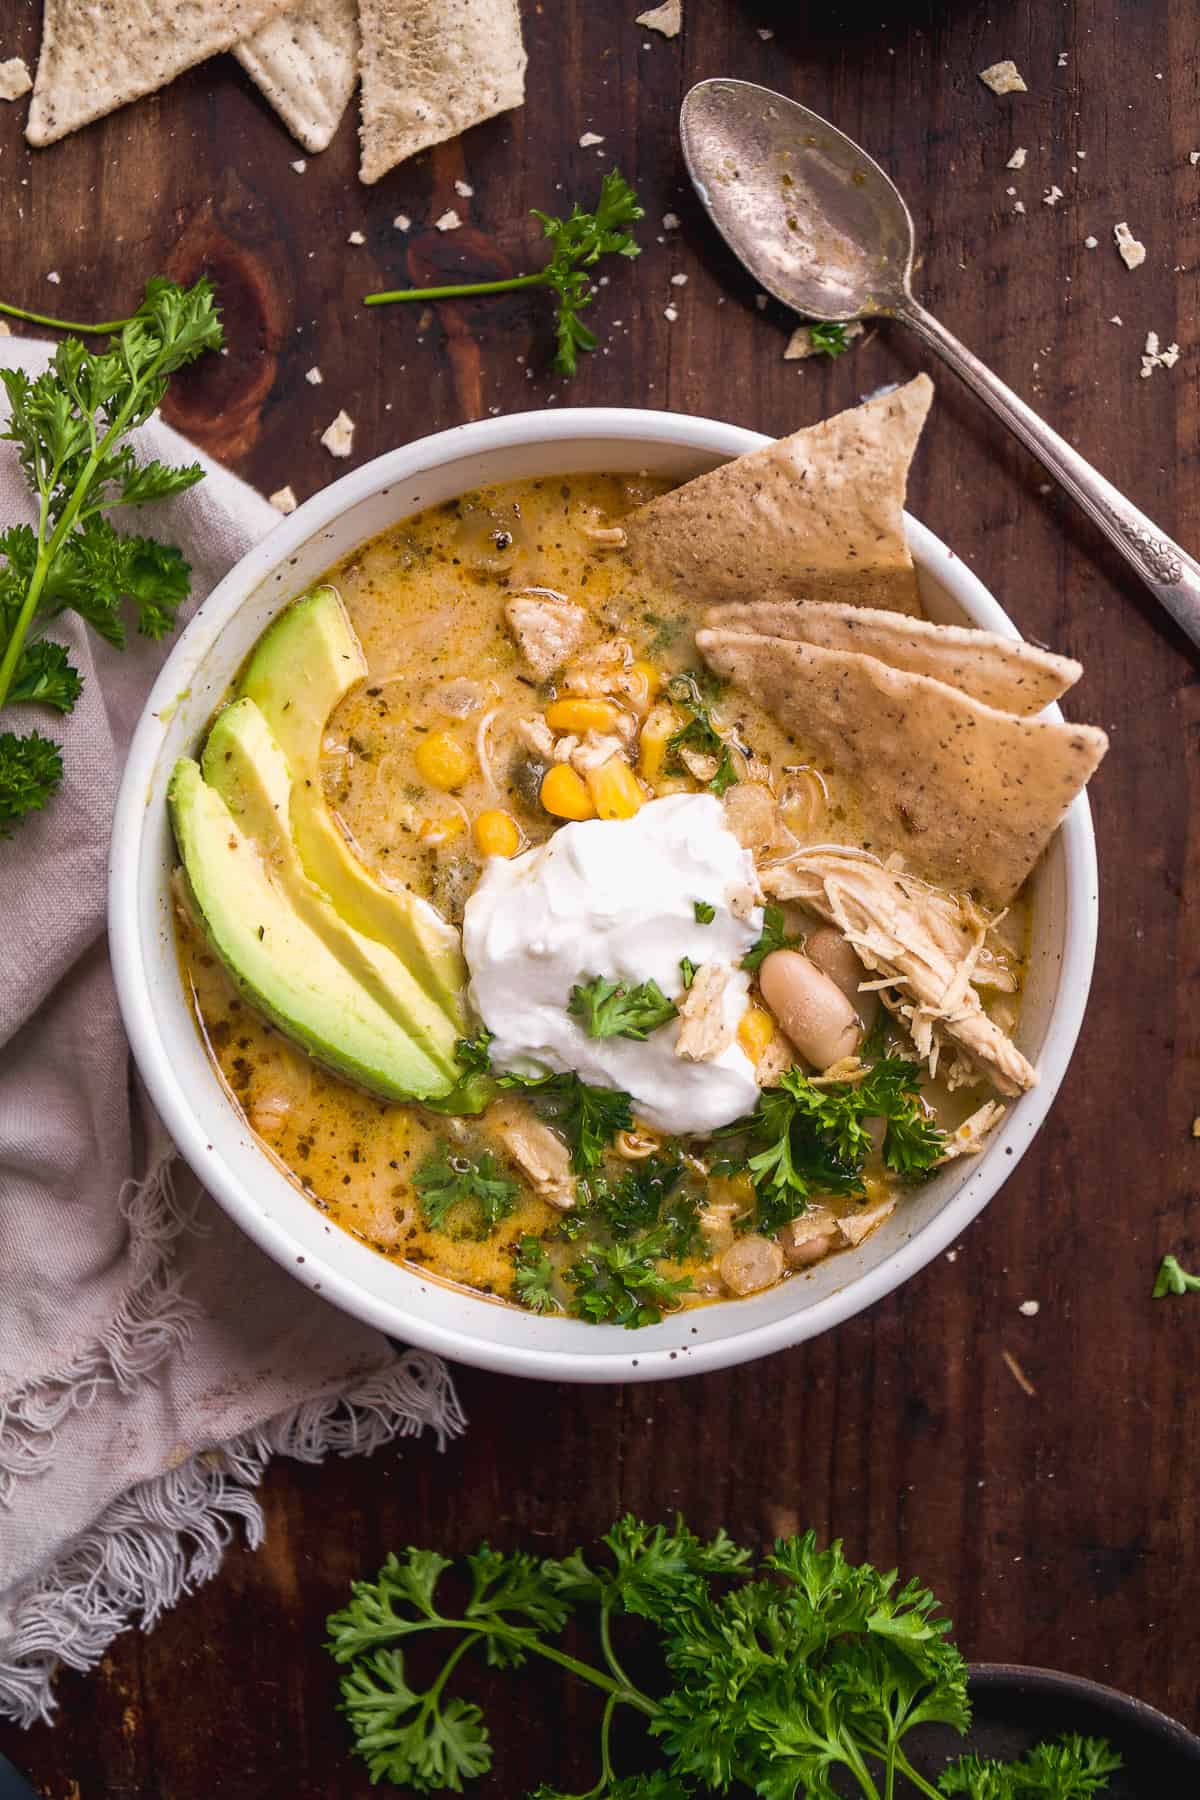 Overhead view of a bowl of chicken chili with chips and avocados inside on a wooden backdrop.